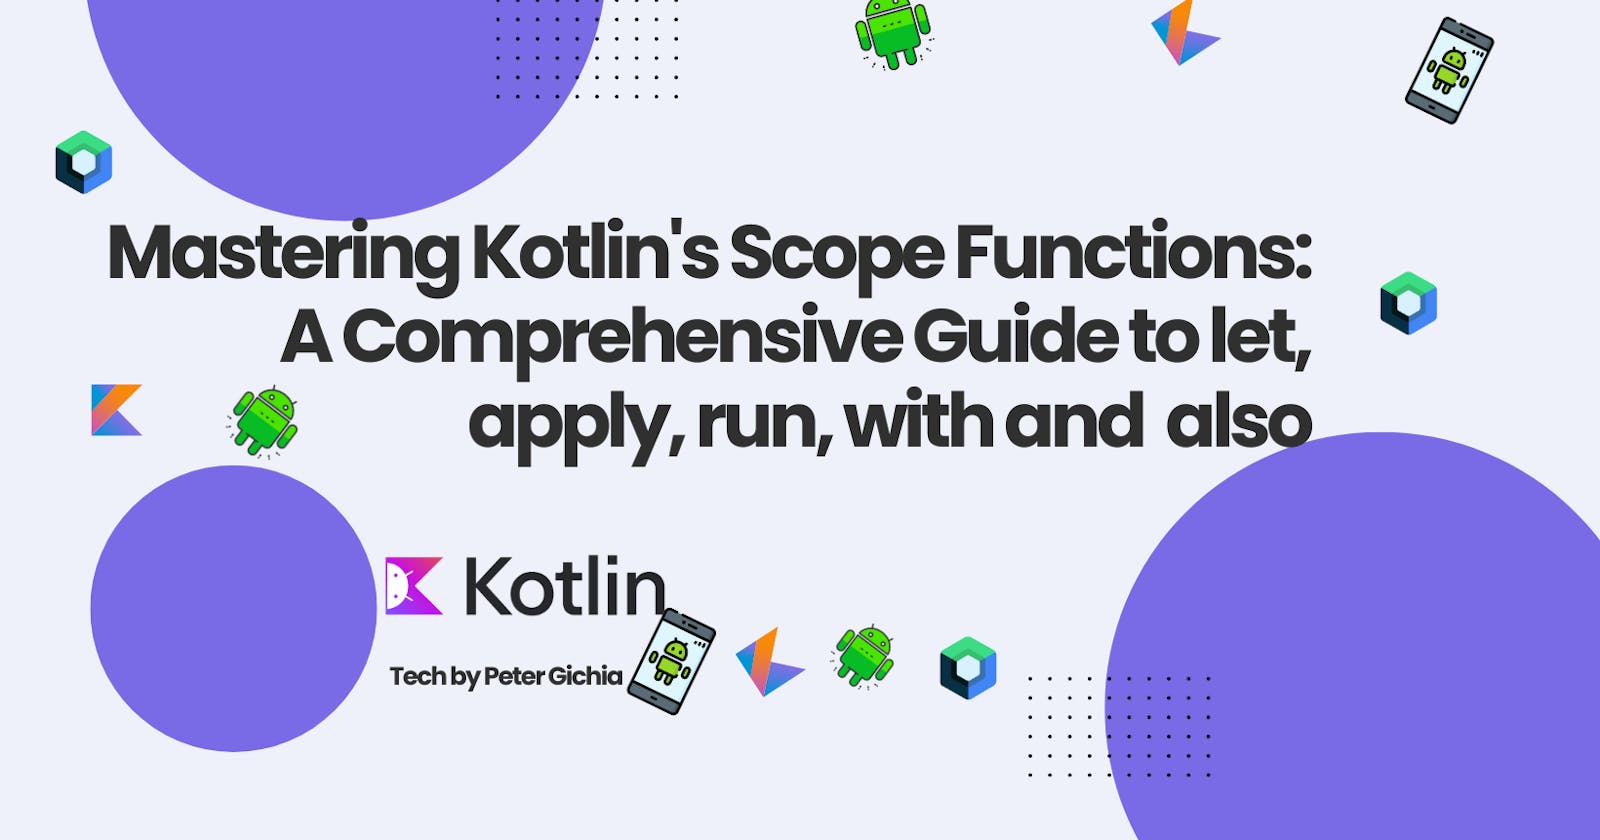 Mastering Kotlin's Scope Functions: A Comprehensive Guide to let, apply, run, and with.